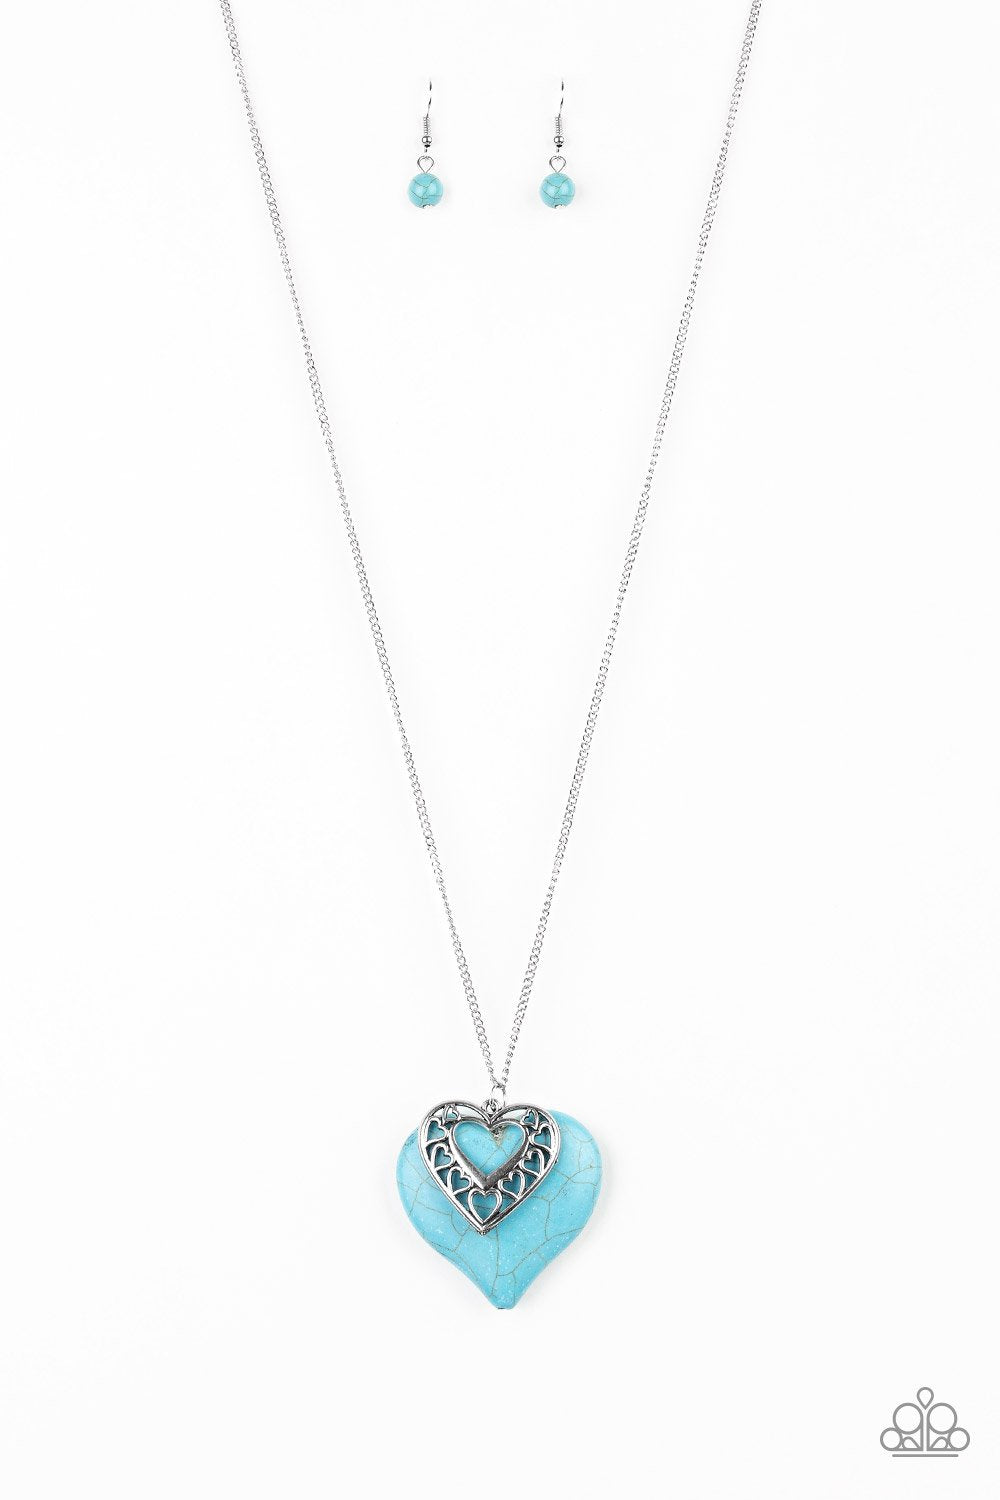 Southern Heart - Paparazzi - Blue Turquoise Heart Pendant Necklace